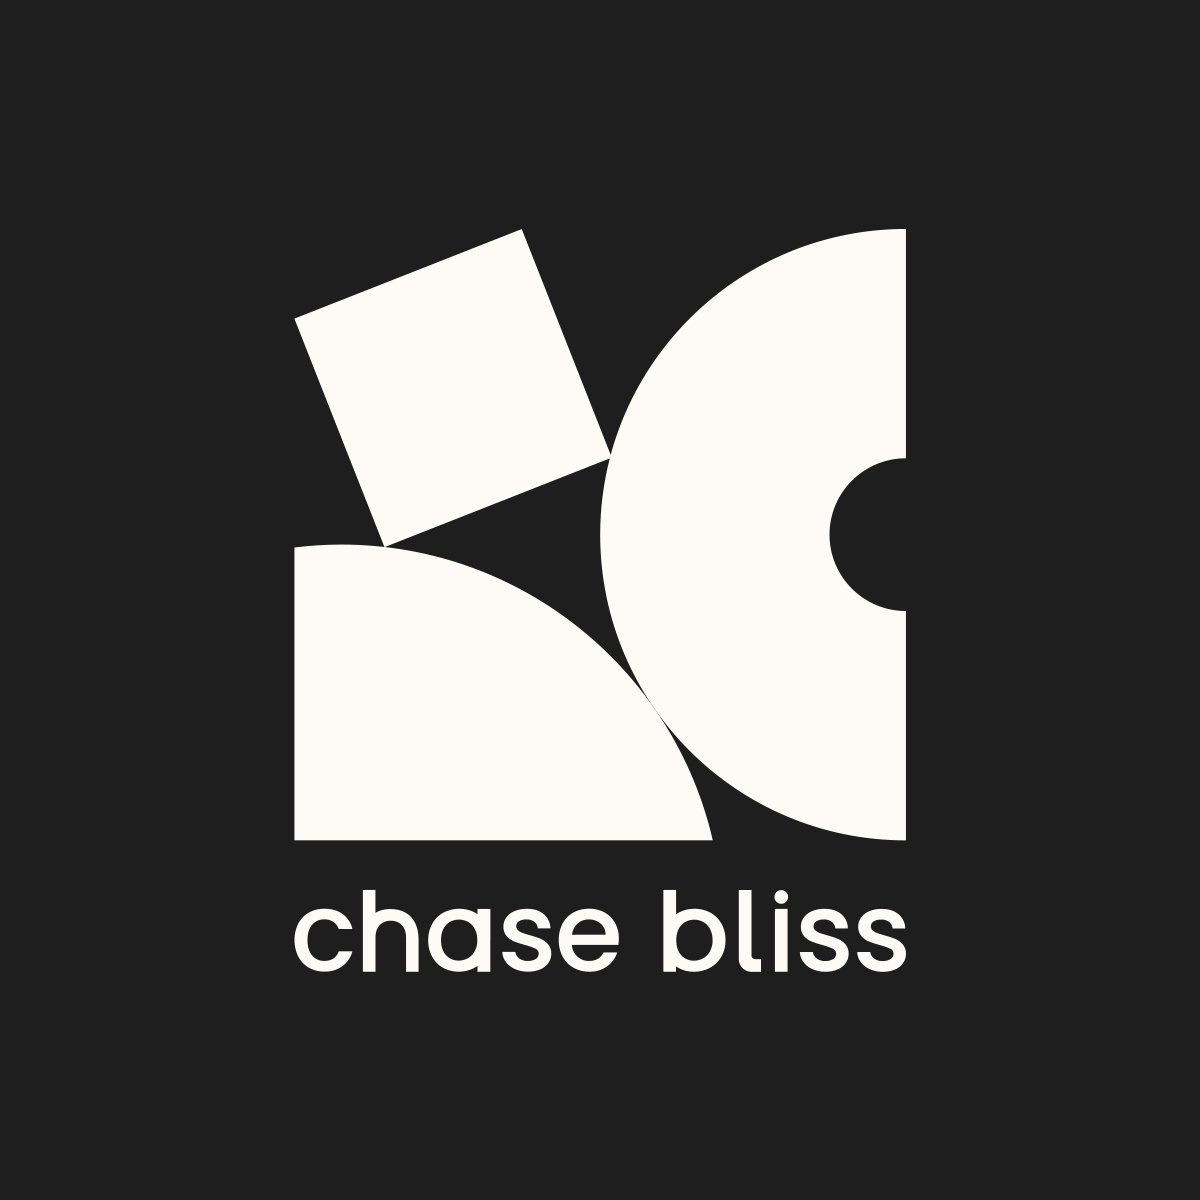 www.chasebliss.com